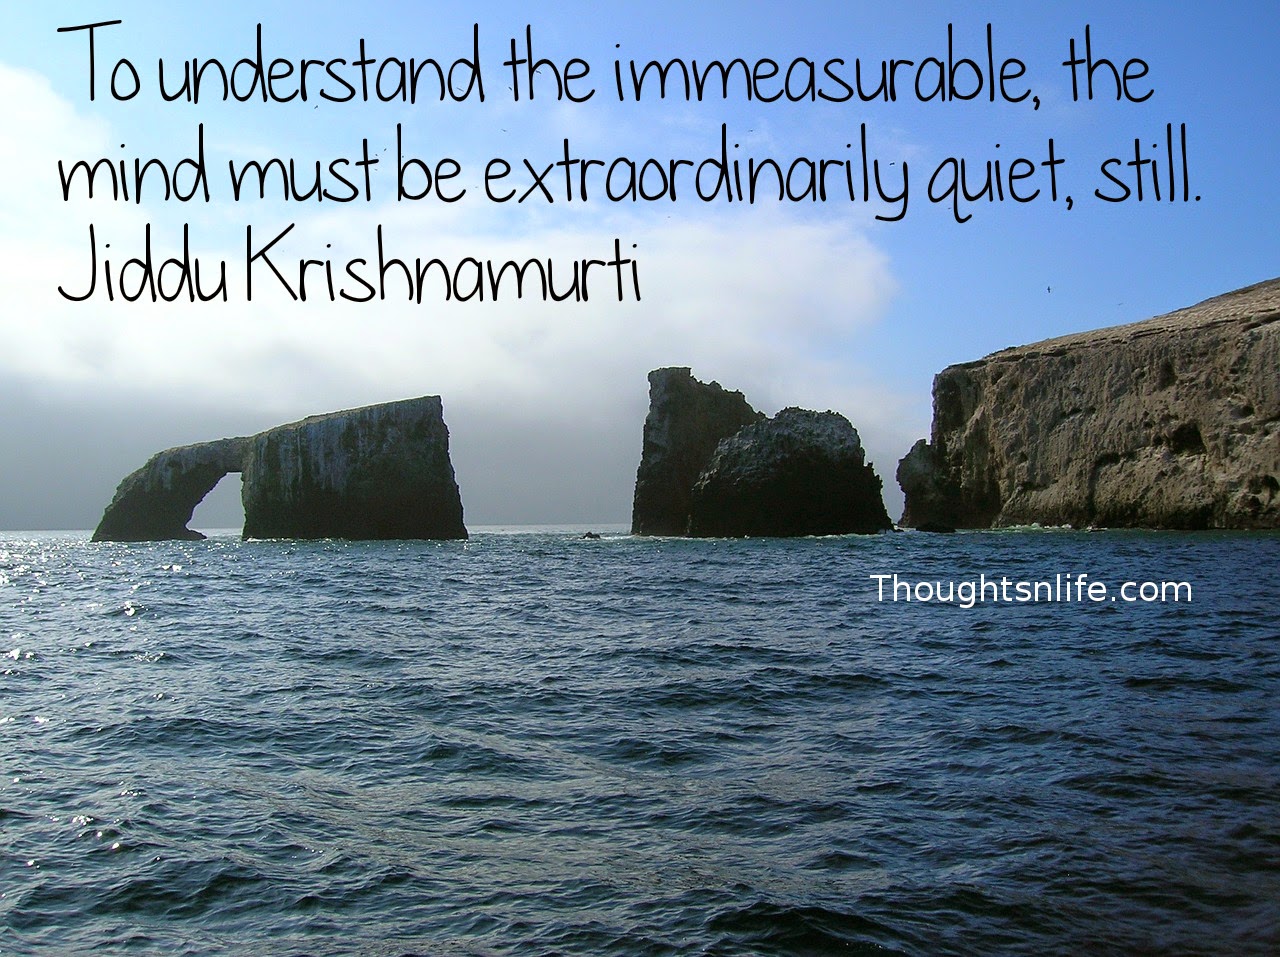 Thoughtsnlife.com: Thoughtsnlife.com: To understand the immeasurable, the mind must be extraordinarily quiet, still. Jiddu Krishnamurti